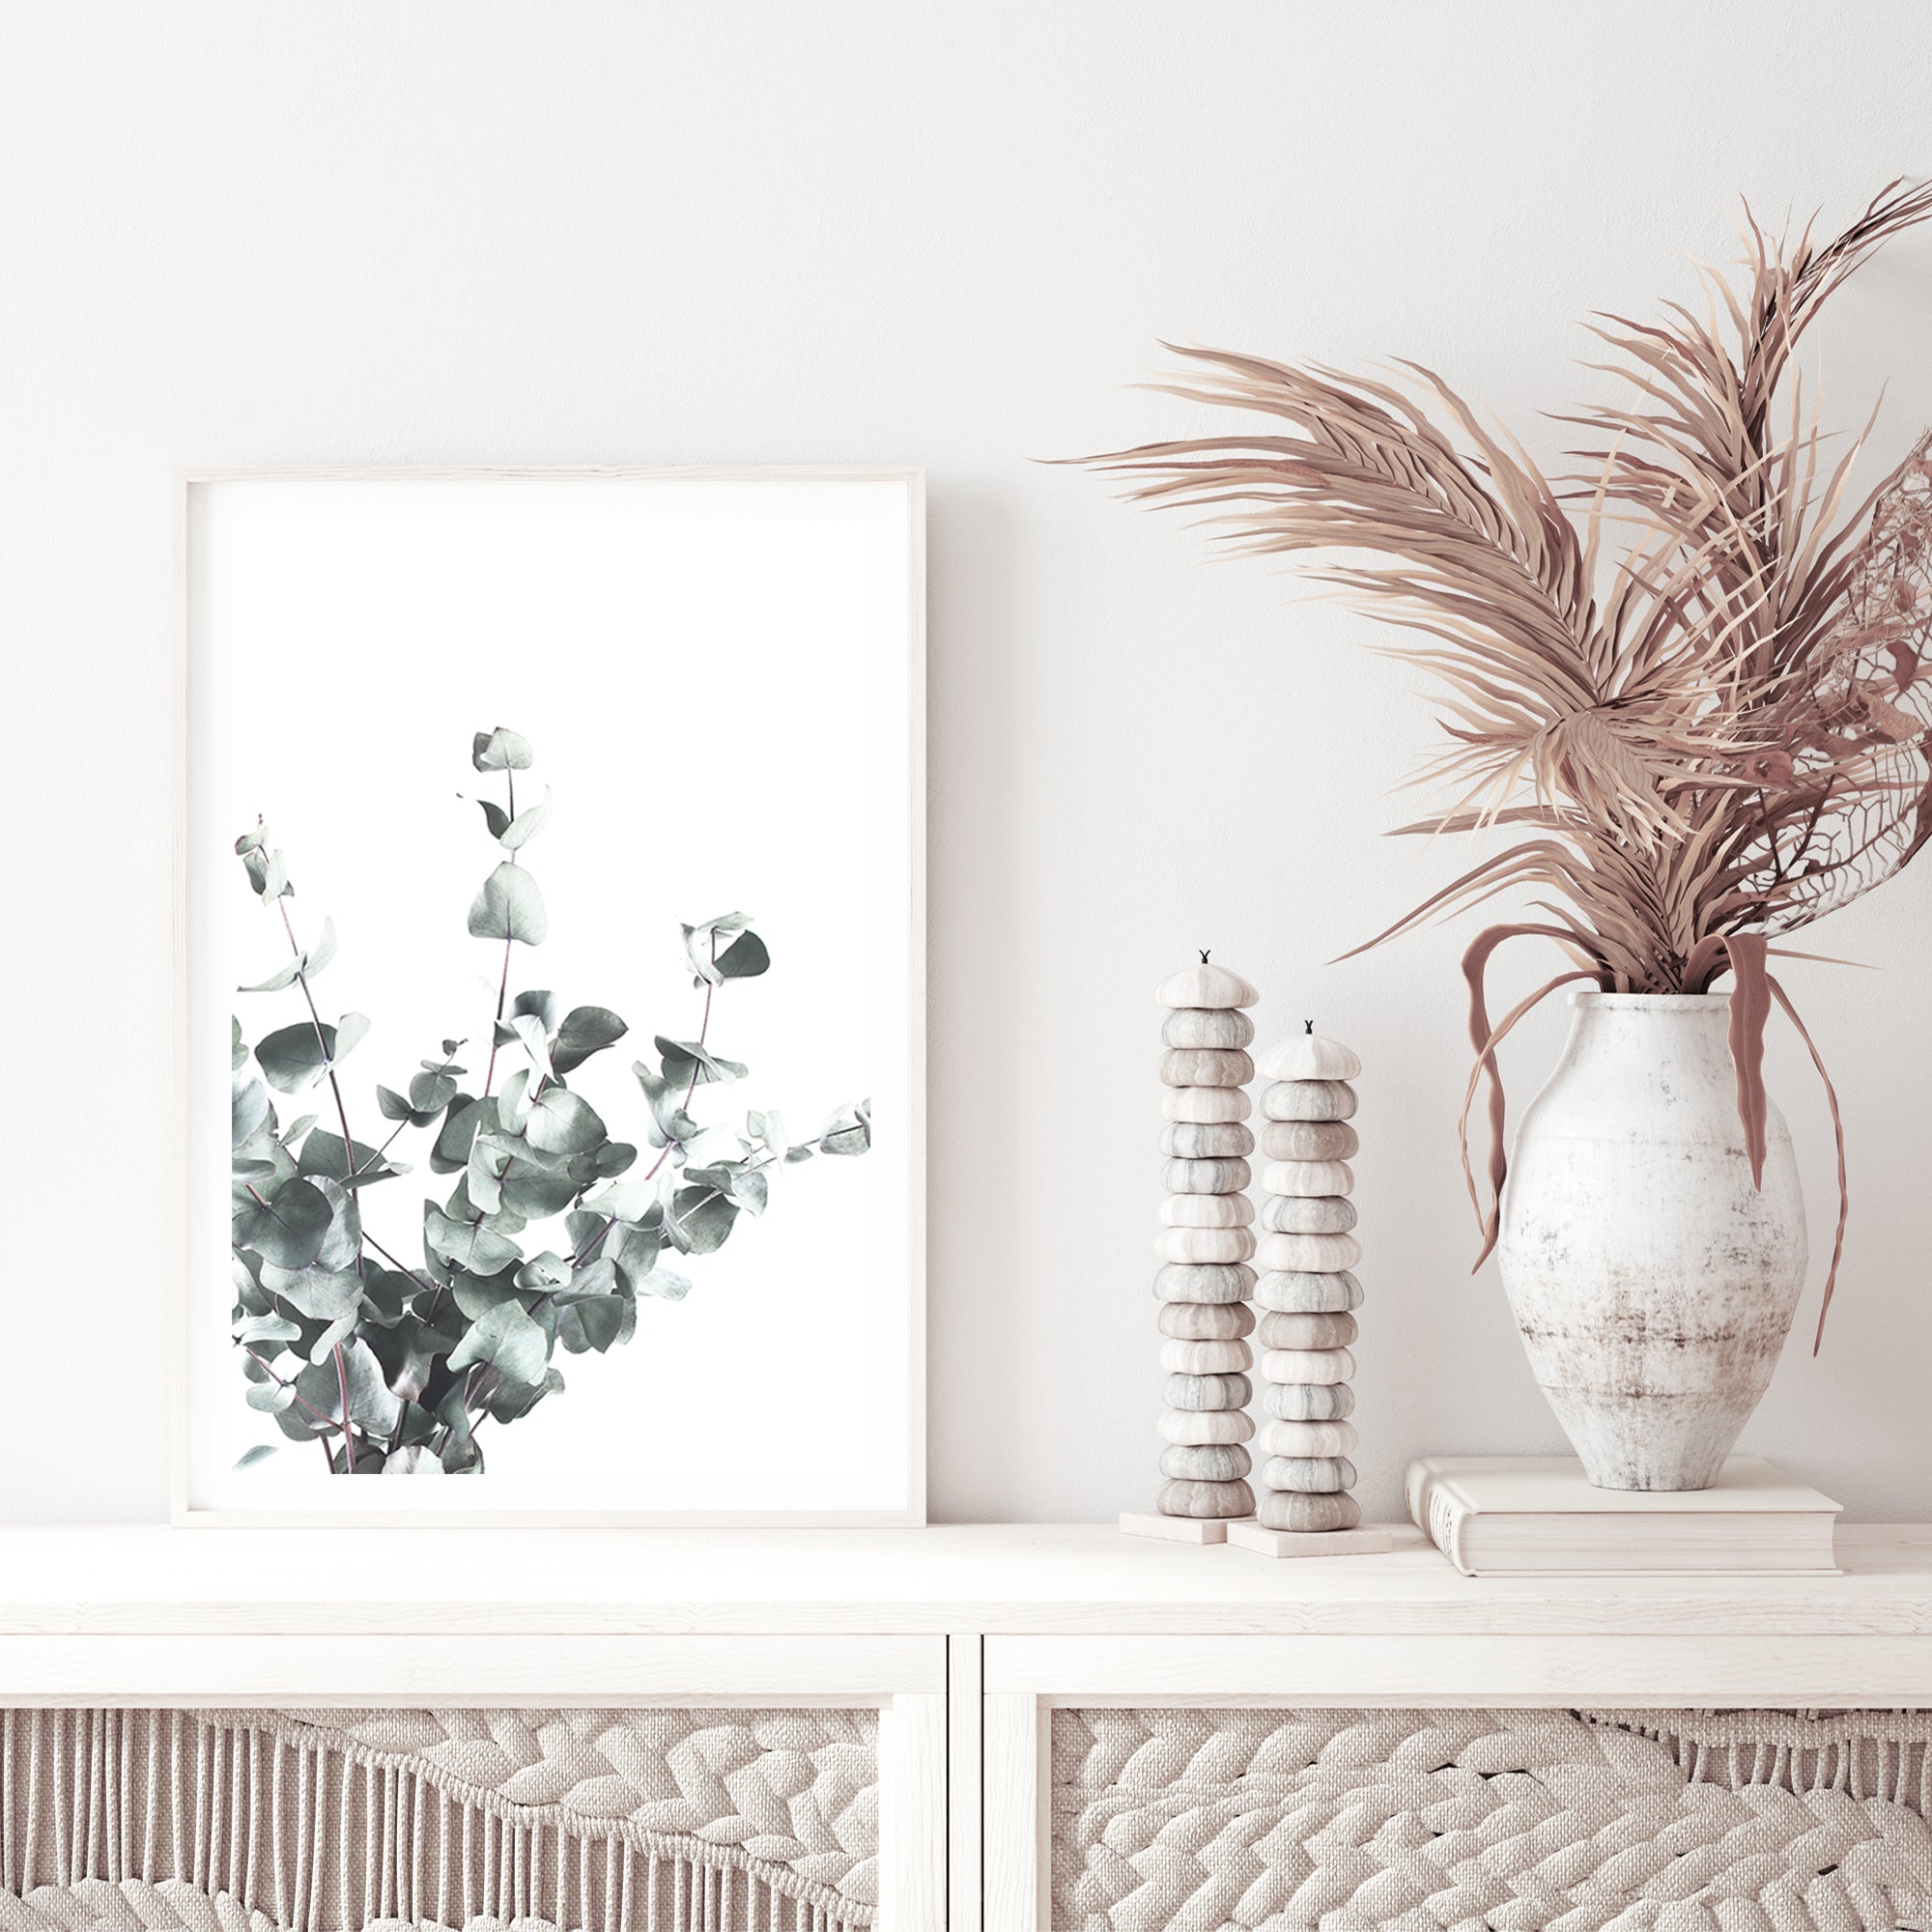 Eucalyptus leaves (A) with a neutral light background is featured in this artwork, available in canvas and print, unframed and framed.